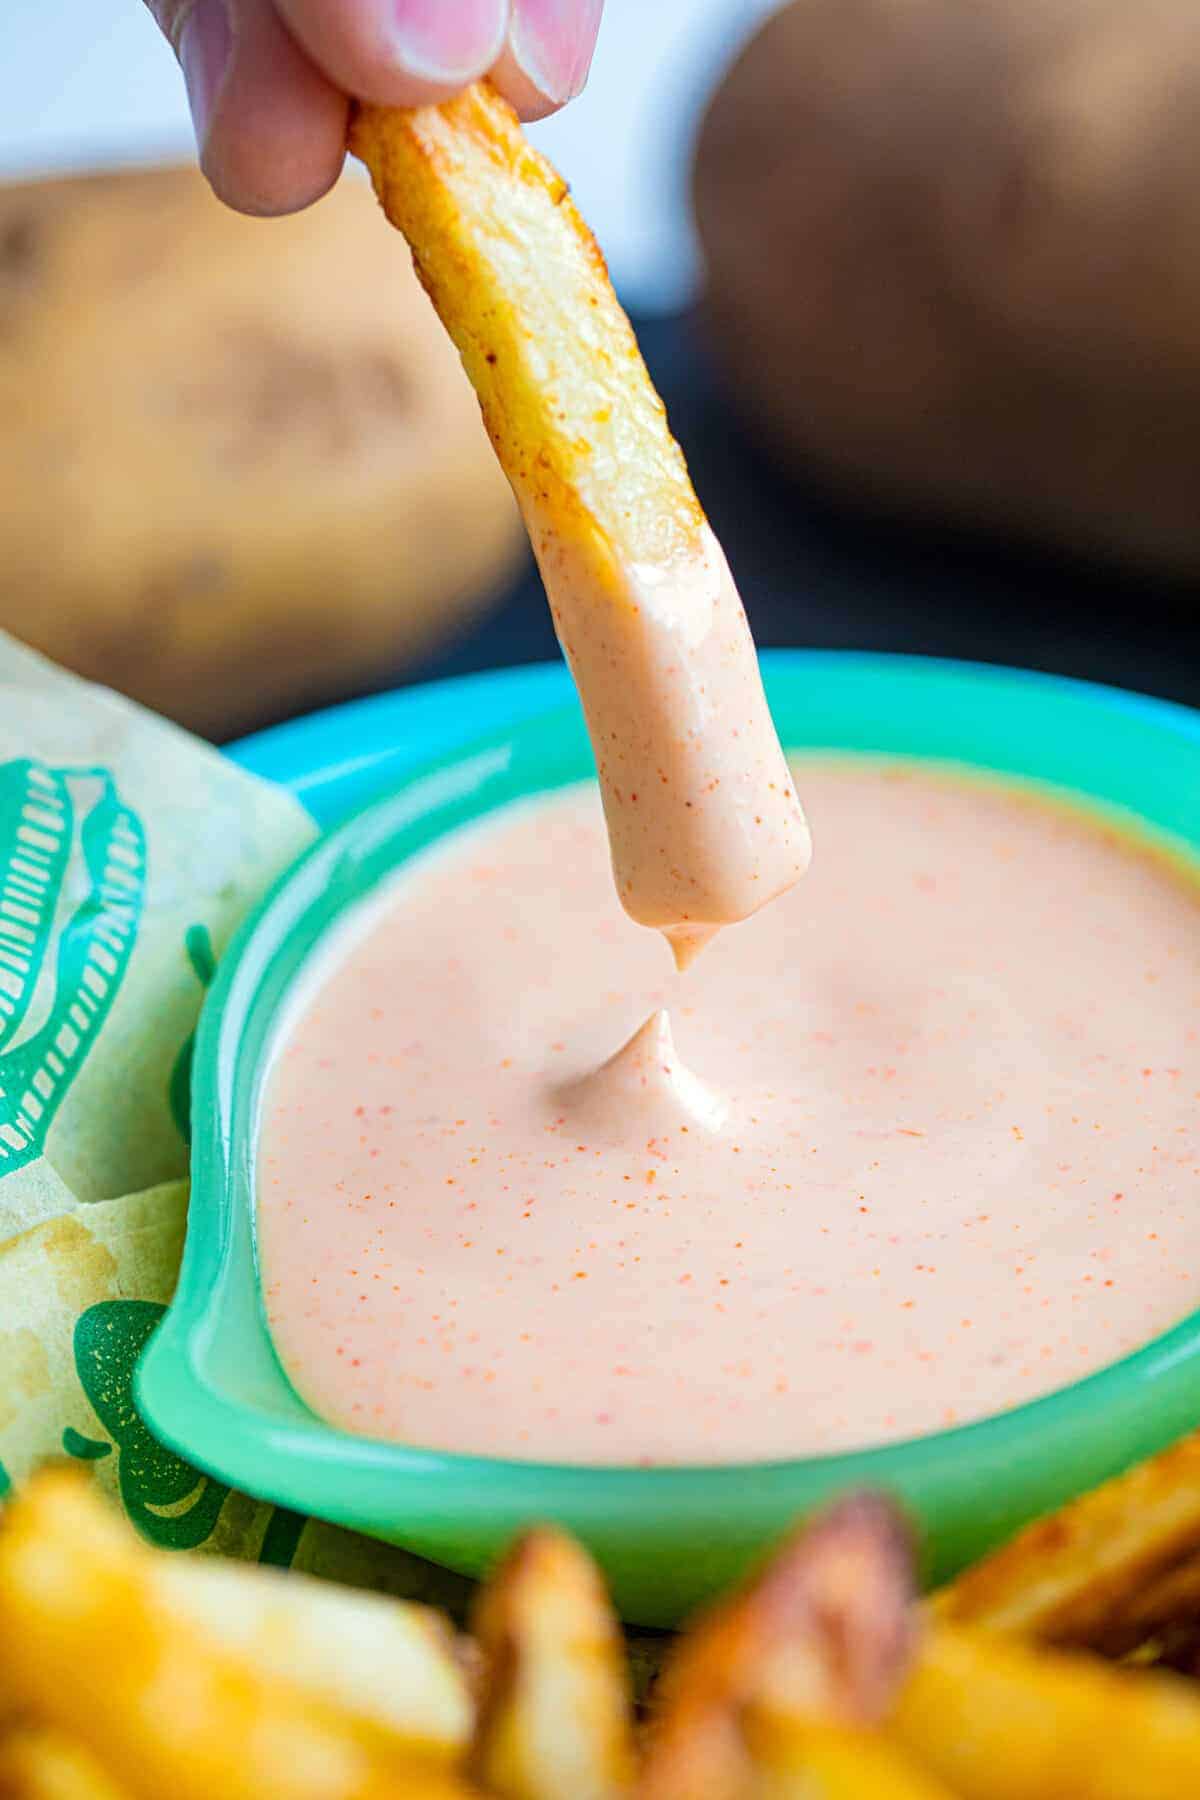 Dipping French fries into fry sauce